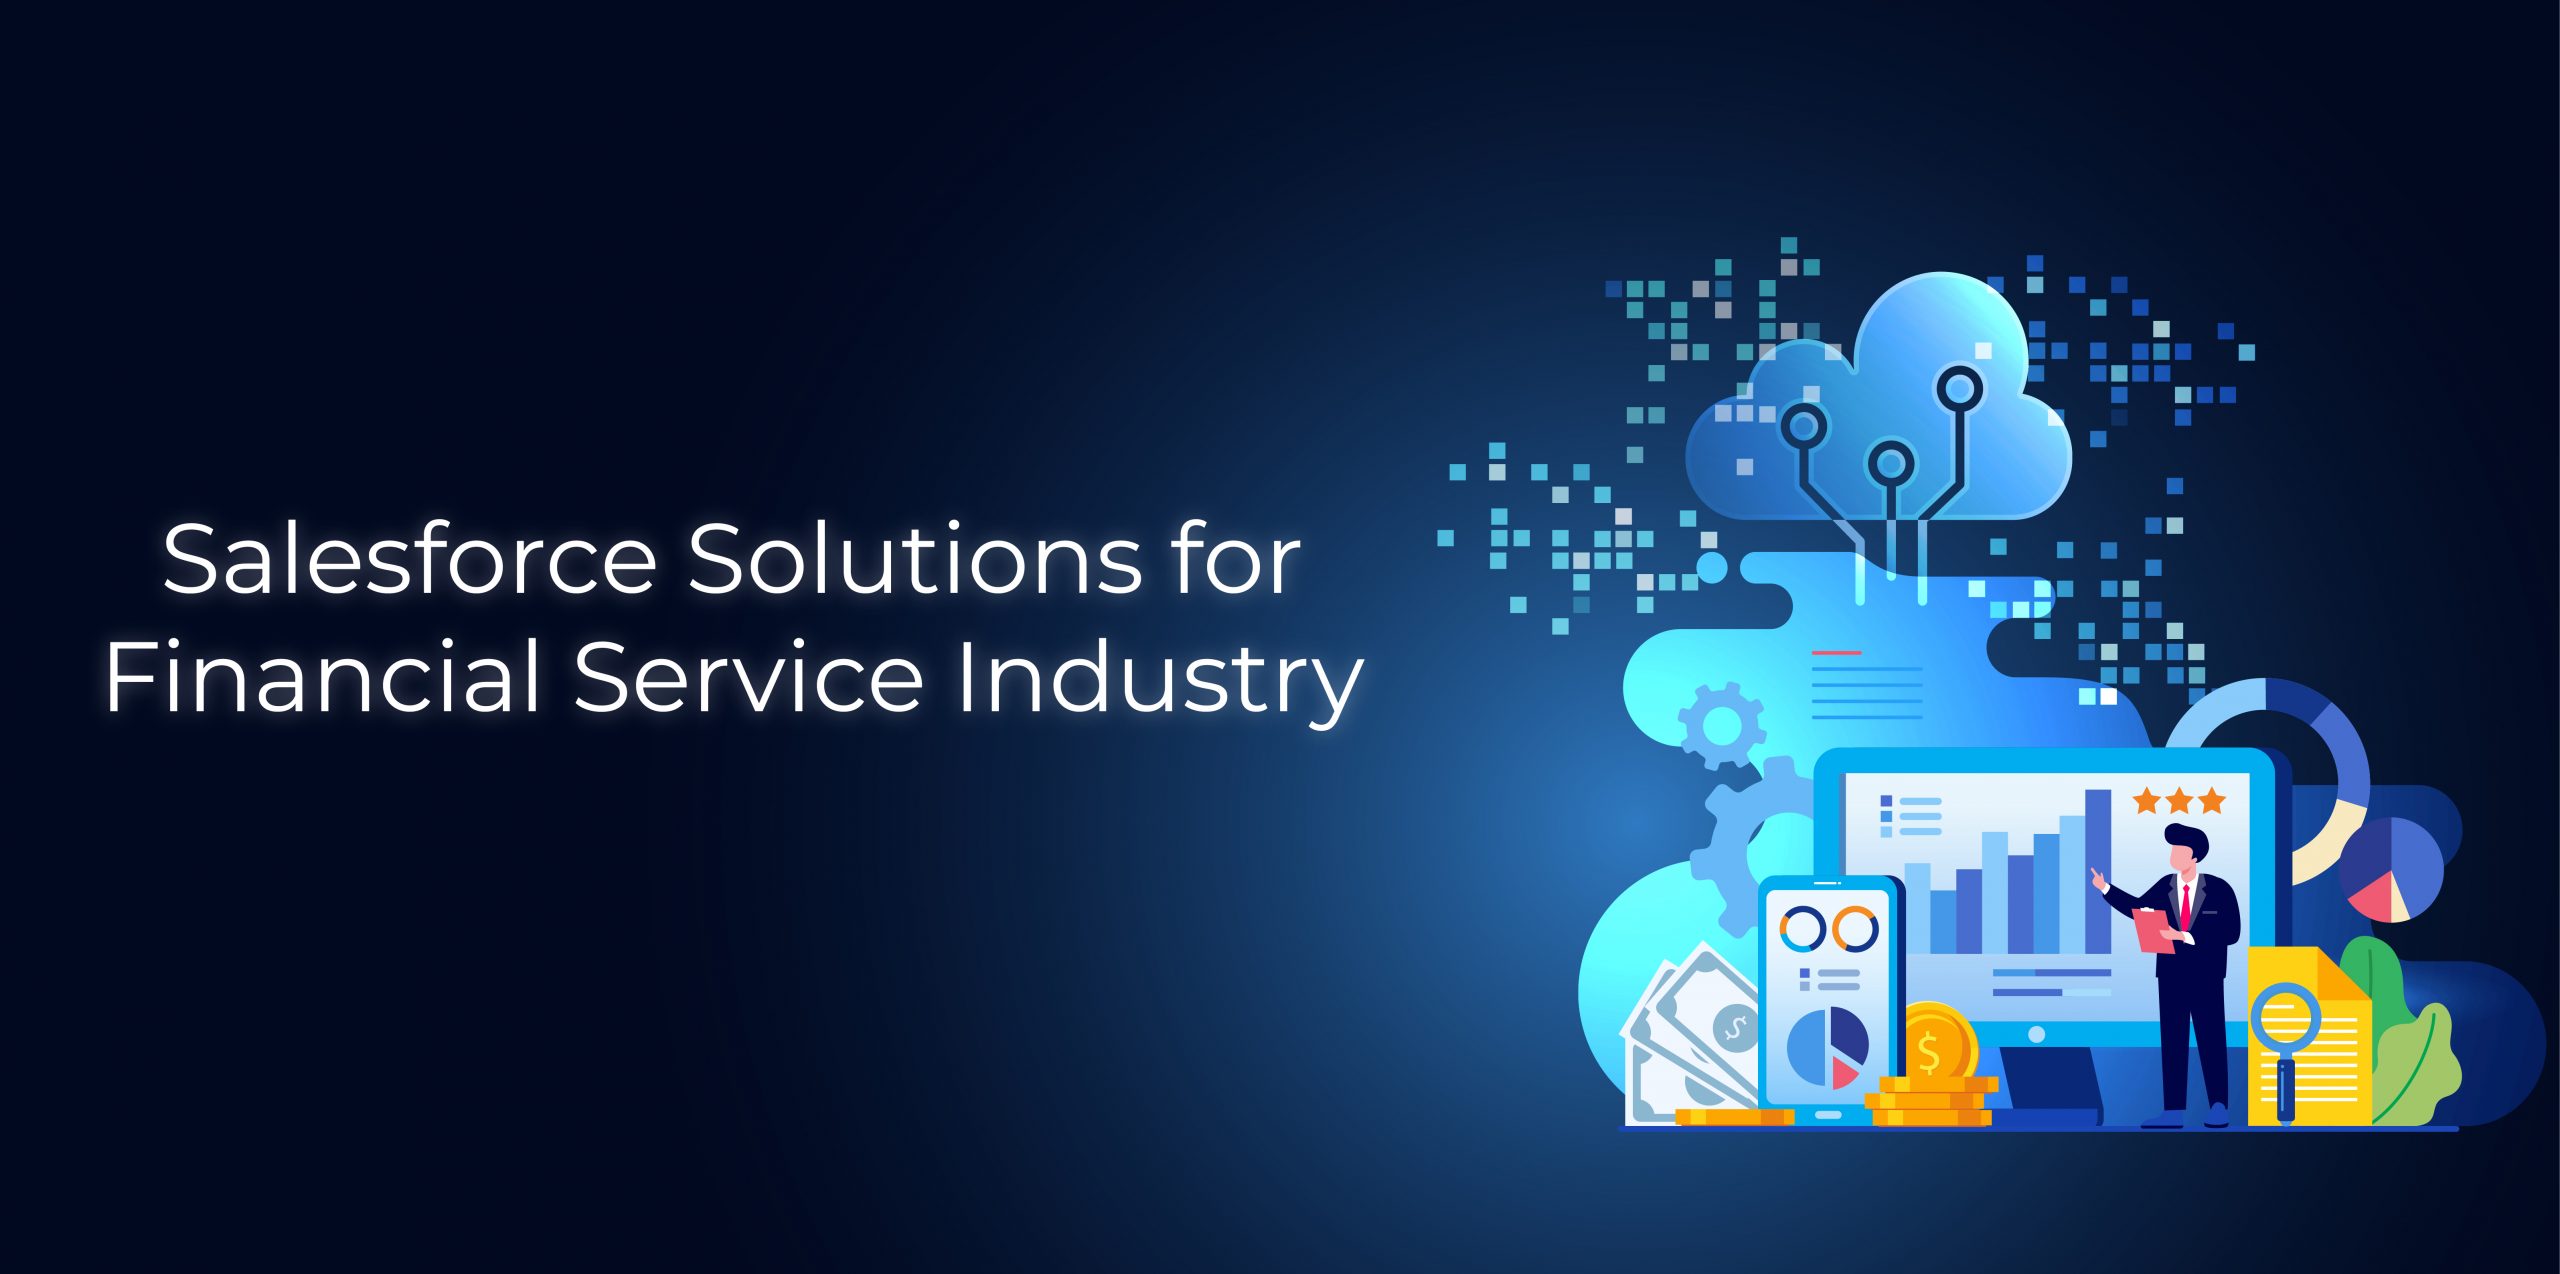 Salesforce Solutions for Financial Service Industry